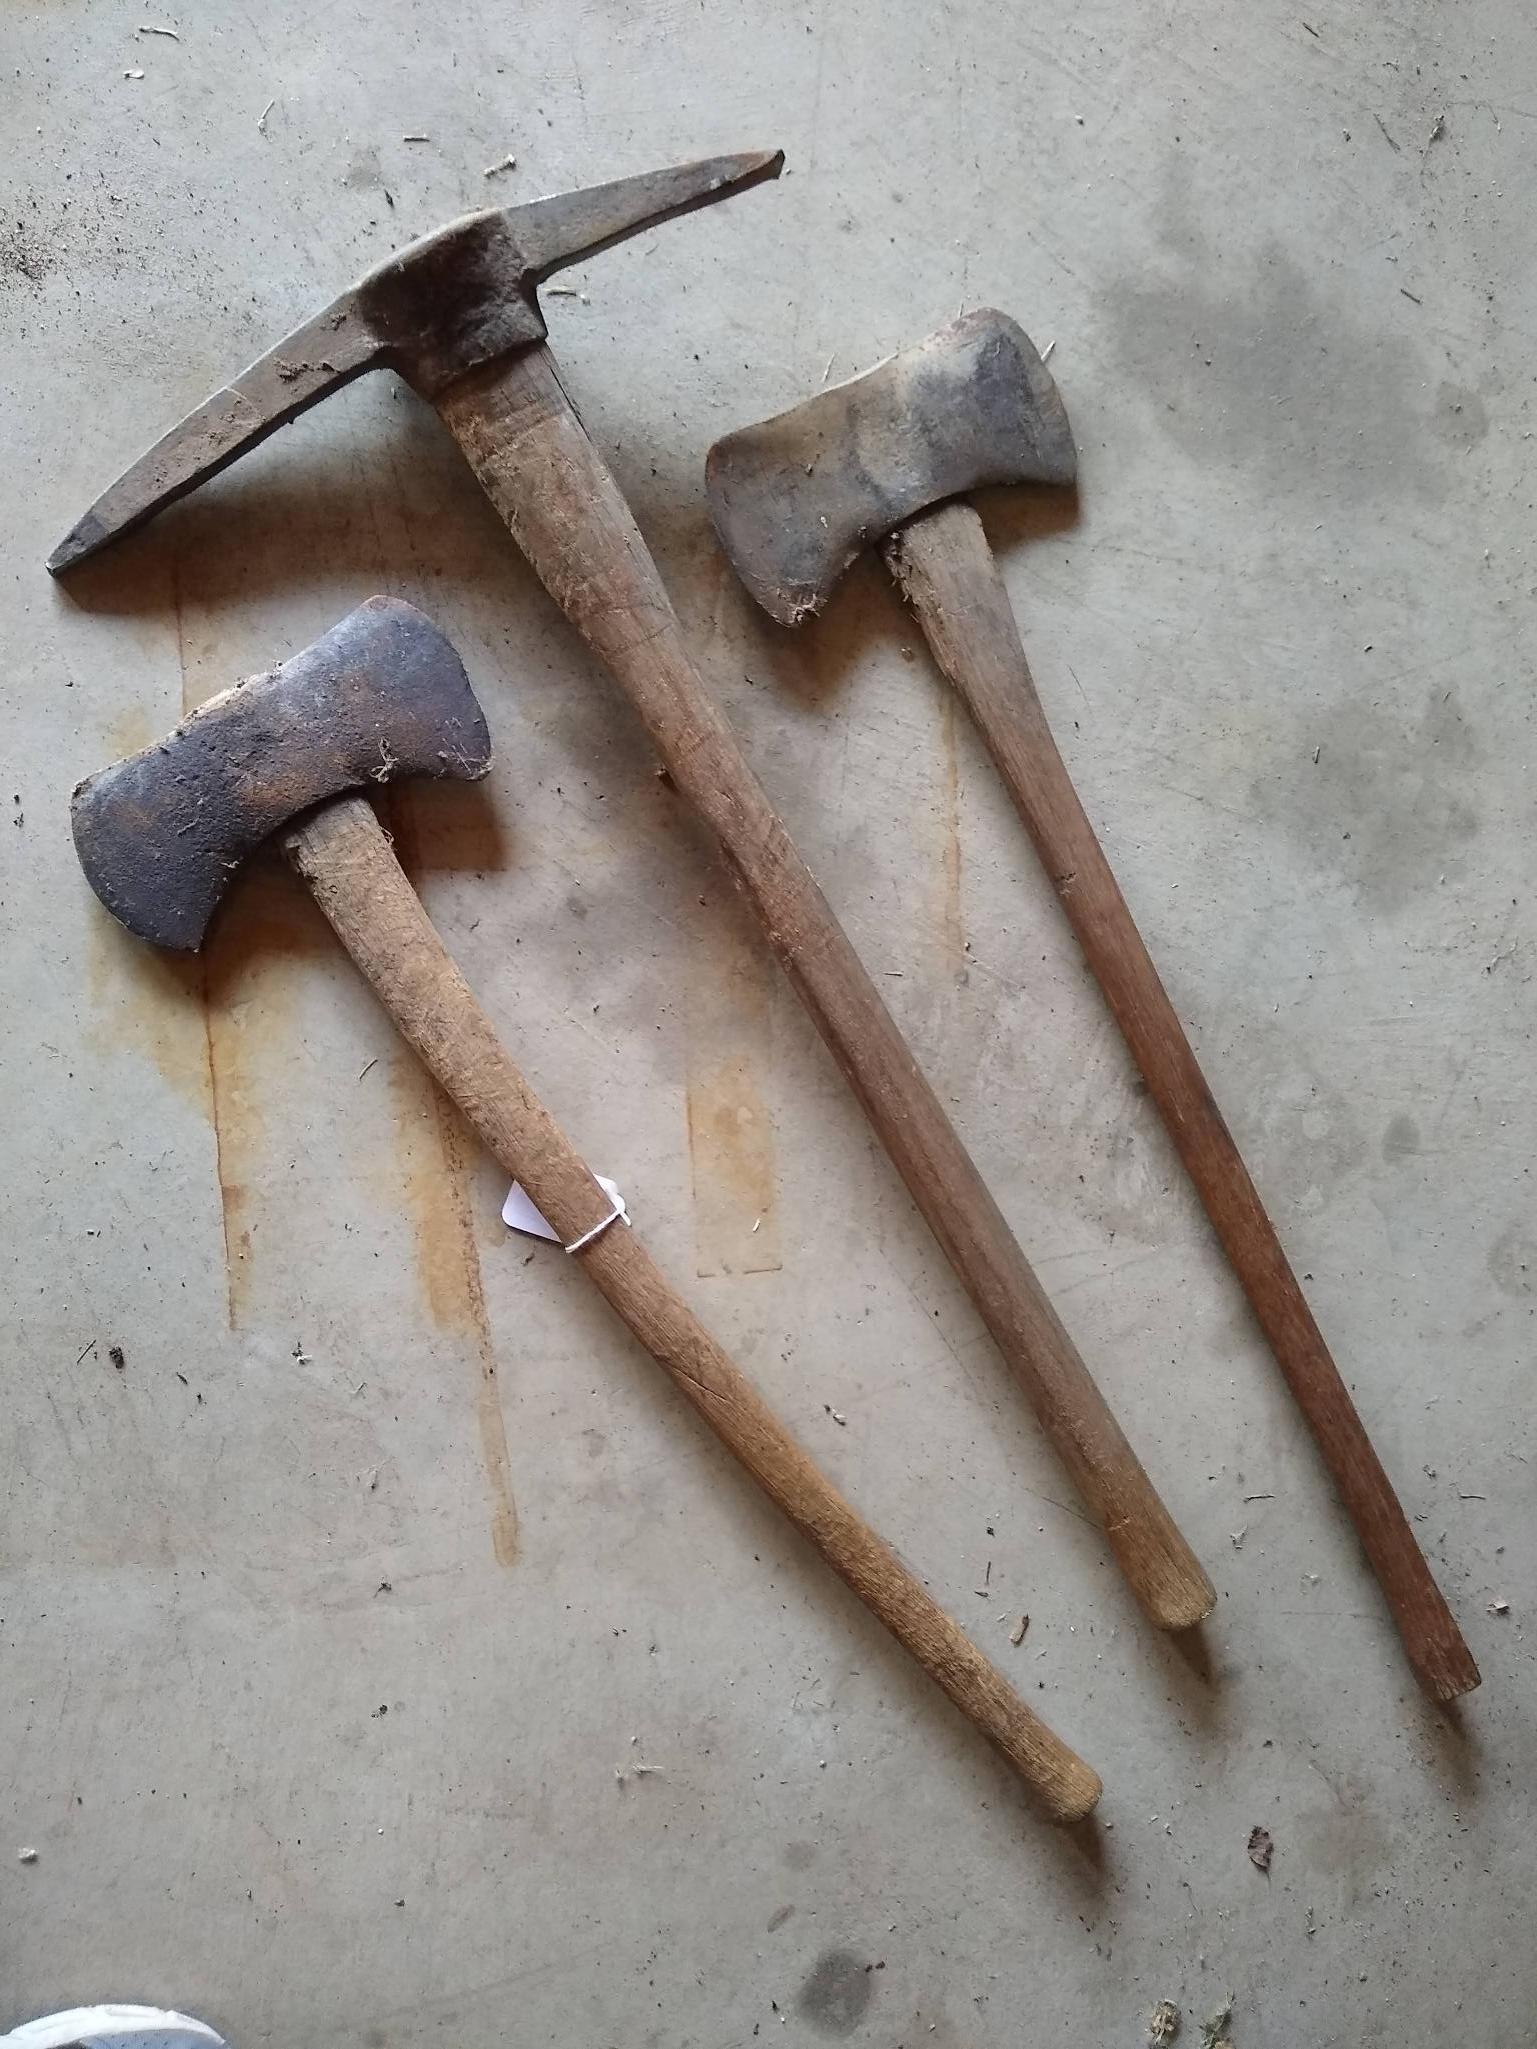 Two double bit axes and a double sided pick axe. Larger double bit axe has a 36" long handle and is